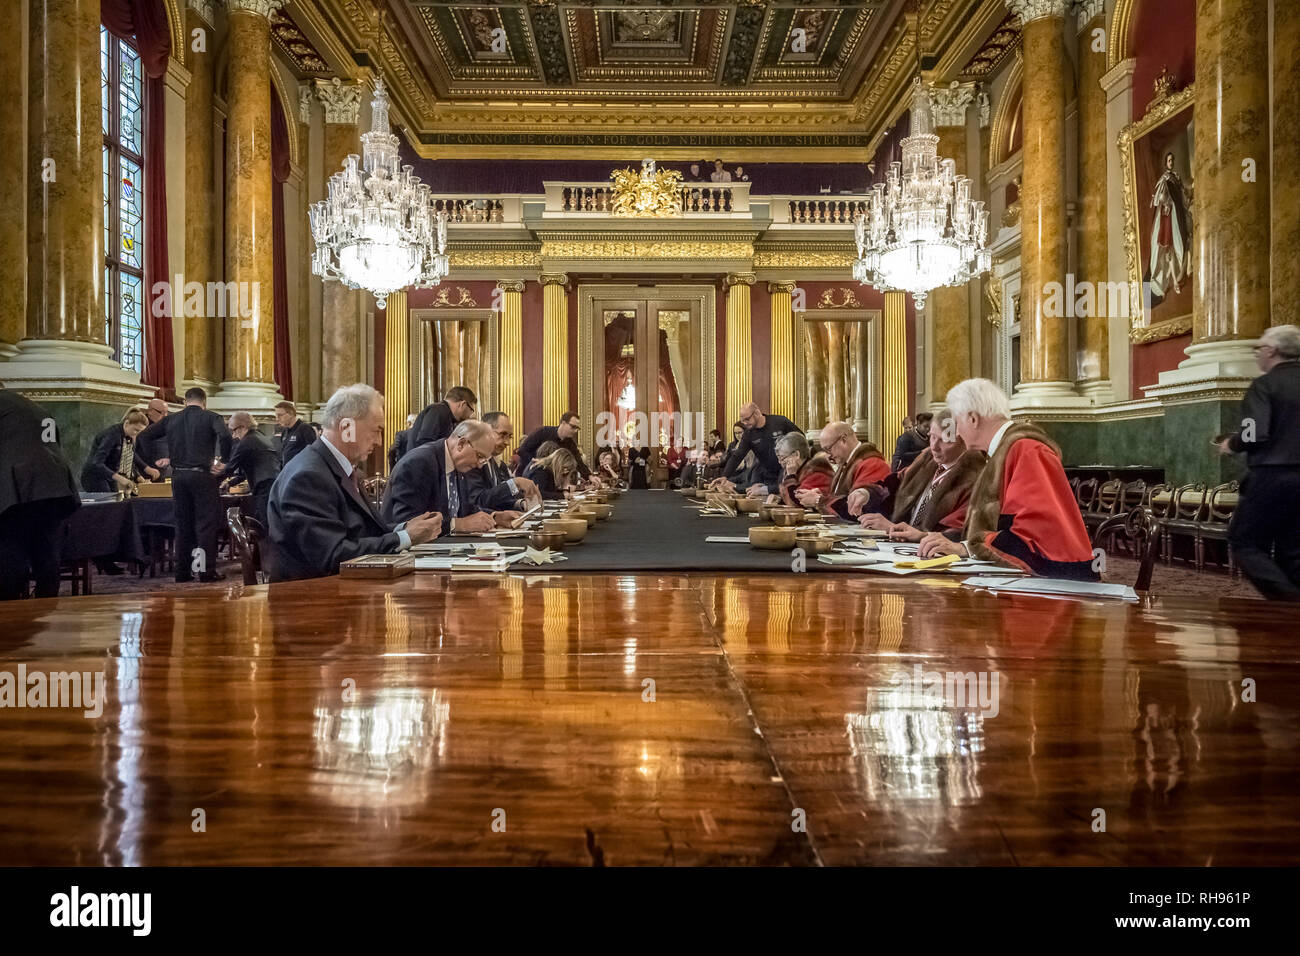 London, UK. 29th Jan, 2019. The Trial of the Pyx at Goldsmiths Hall. Credit: Guy Corbishley/Alamy Live News Stock Photo